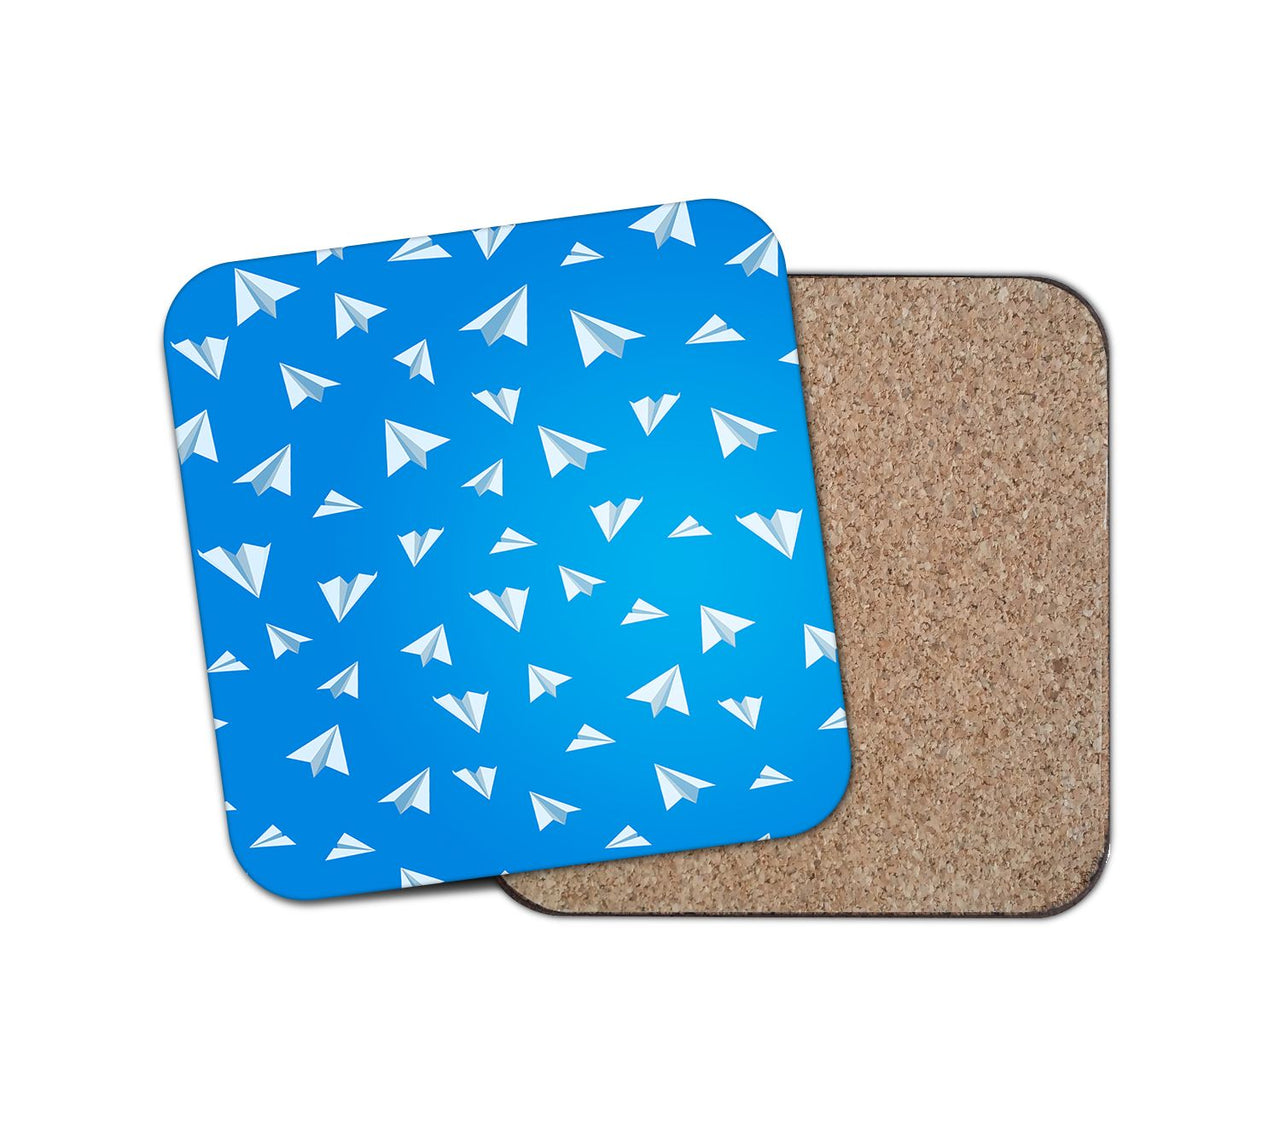 Paper Airplanes (Blue) Designed Coasters